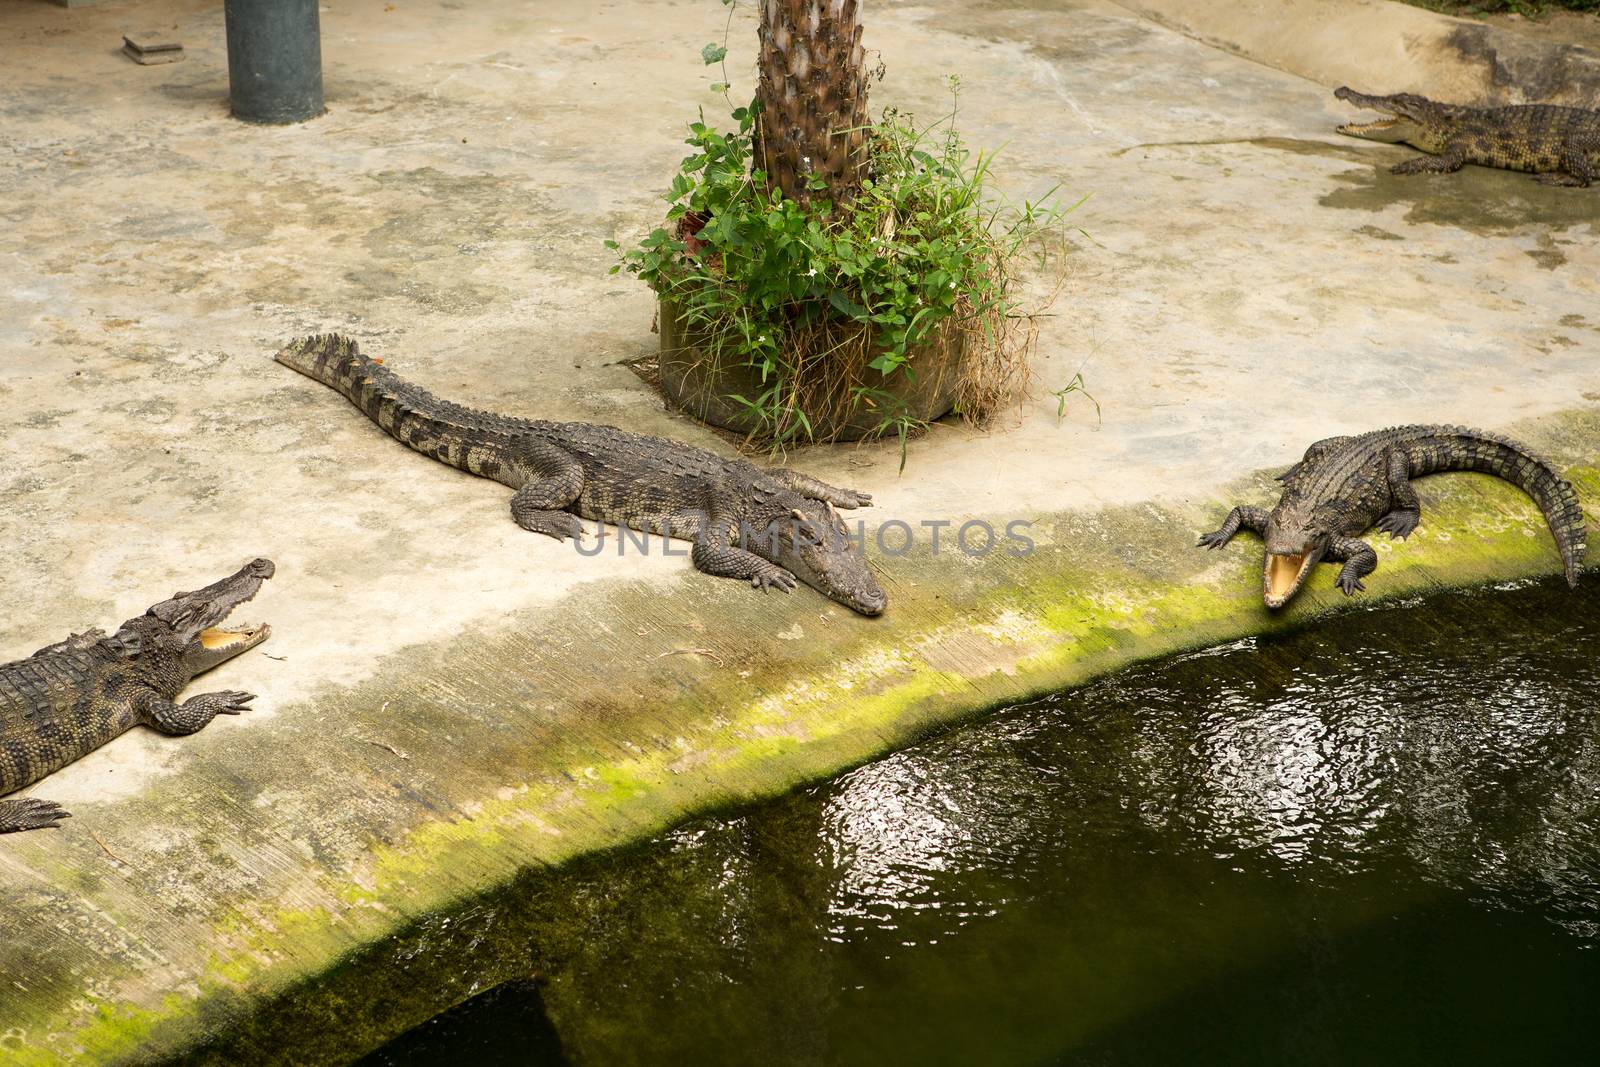 The Thailand crocodile farm and zoo in Patong